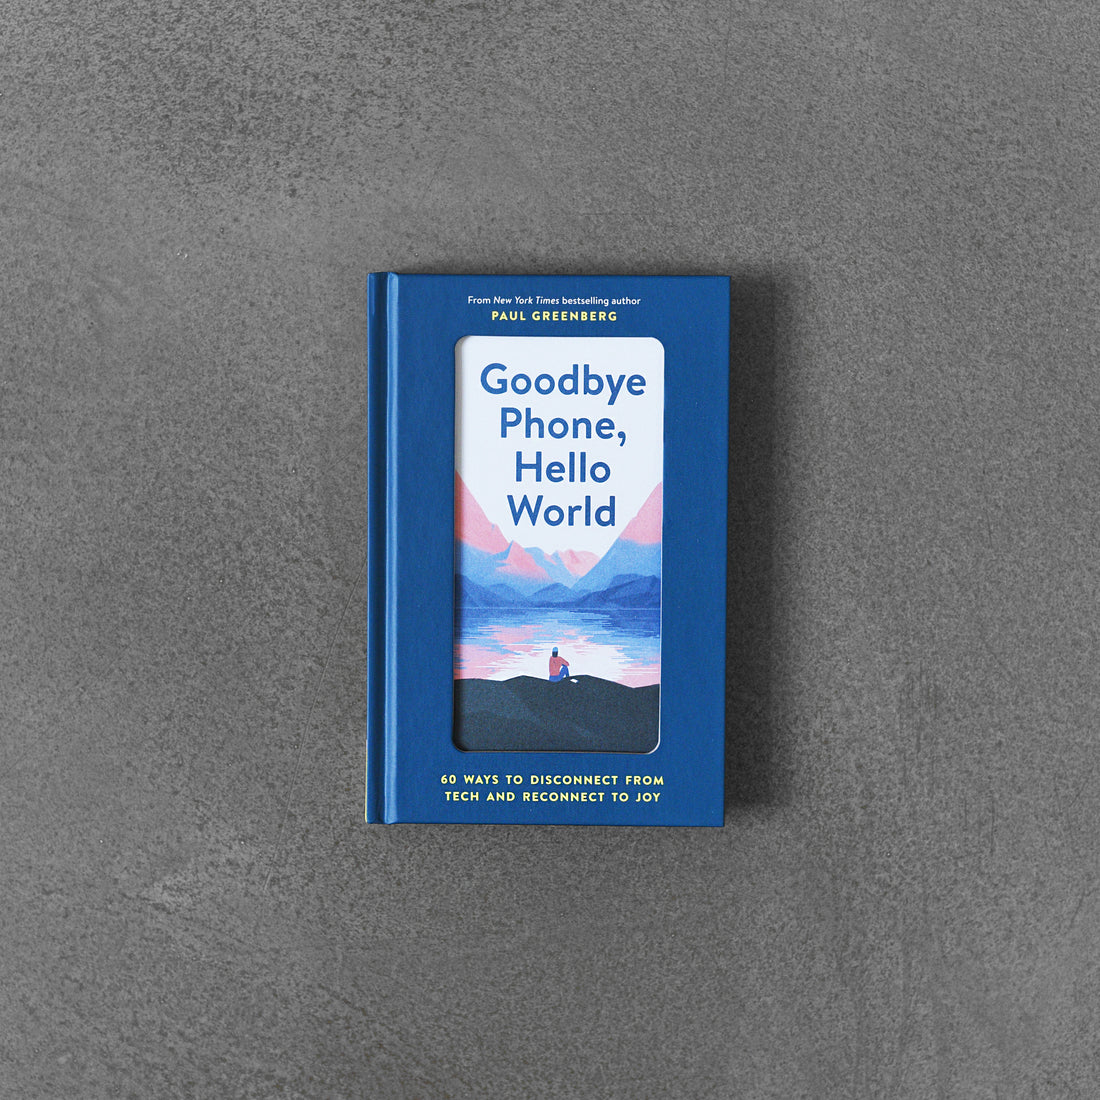 Goodbye Phone, Hello World: 60 Ways to Disconnect from Tech and Reconnect to Joy